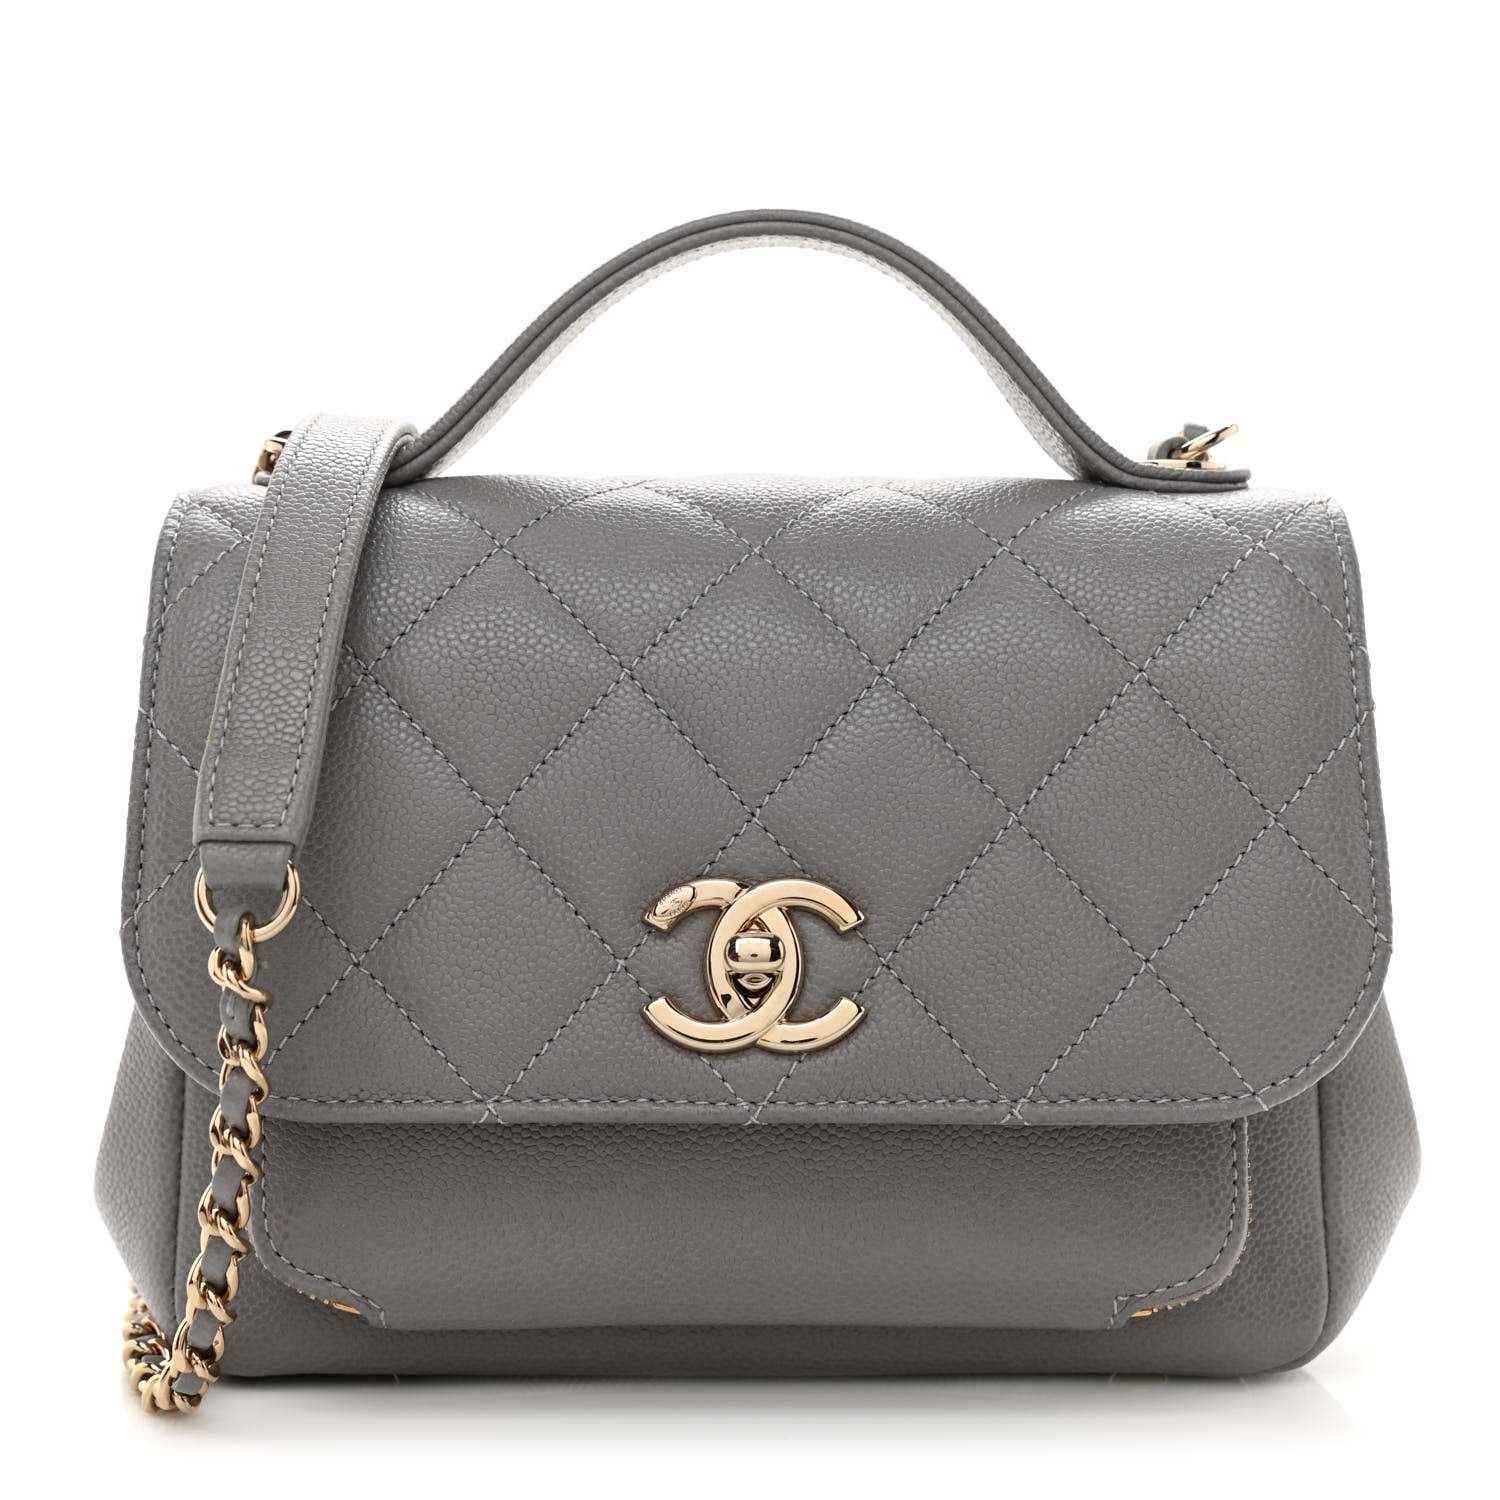 Chanel Small Business Affinity Bag